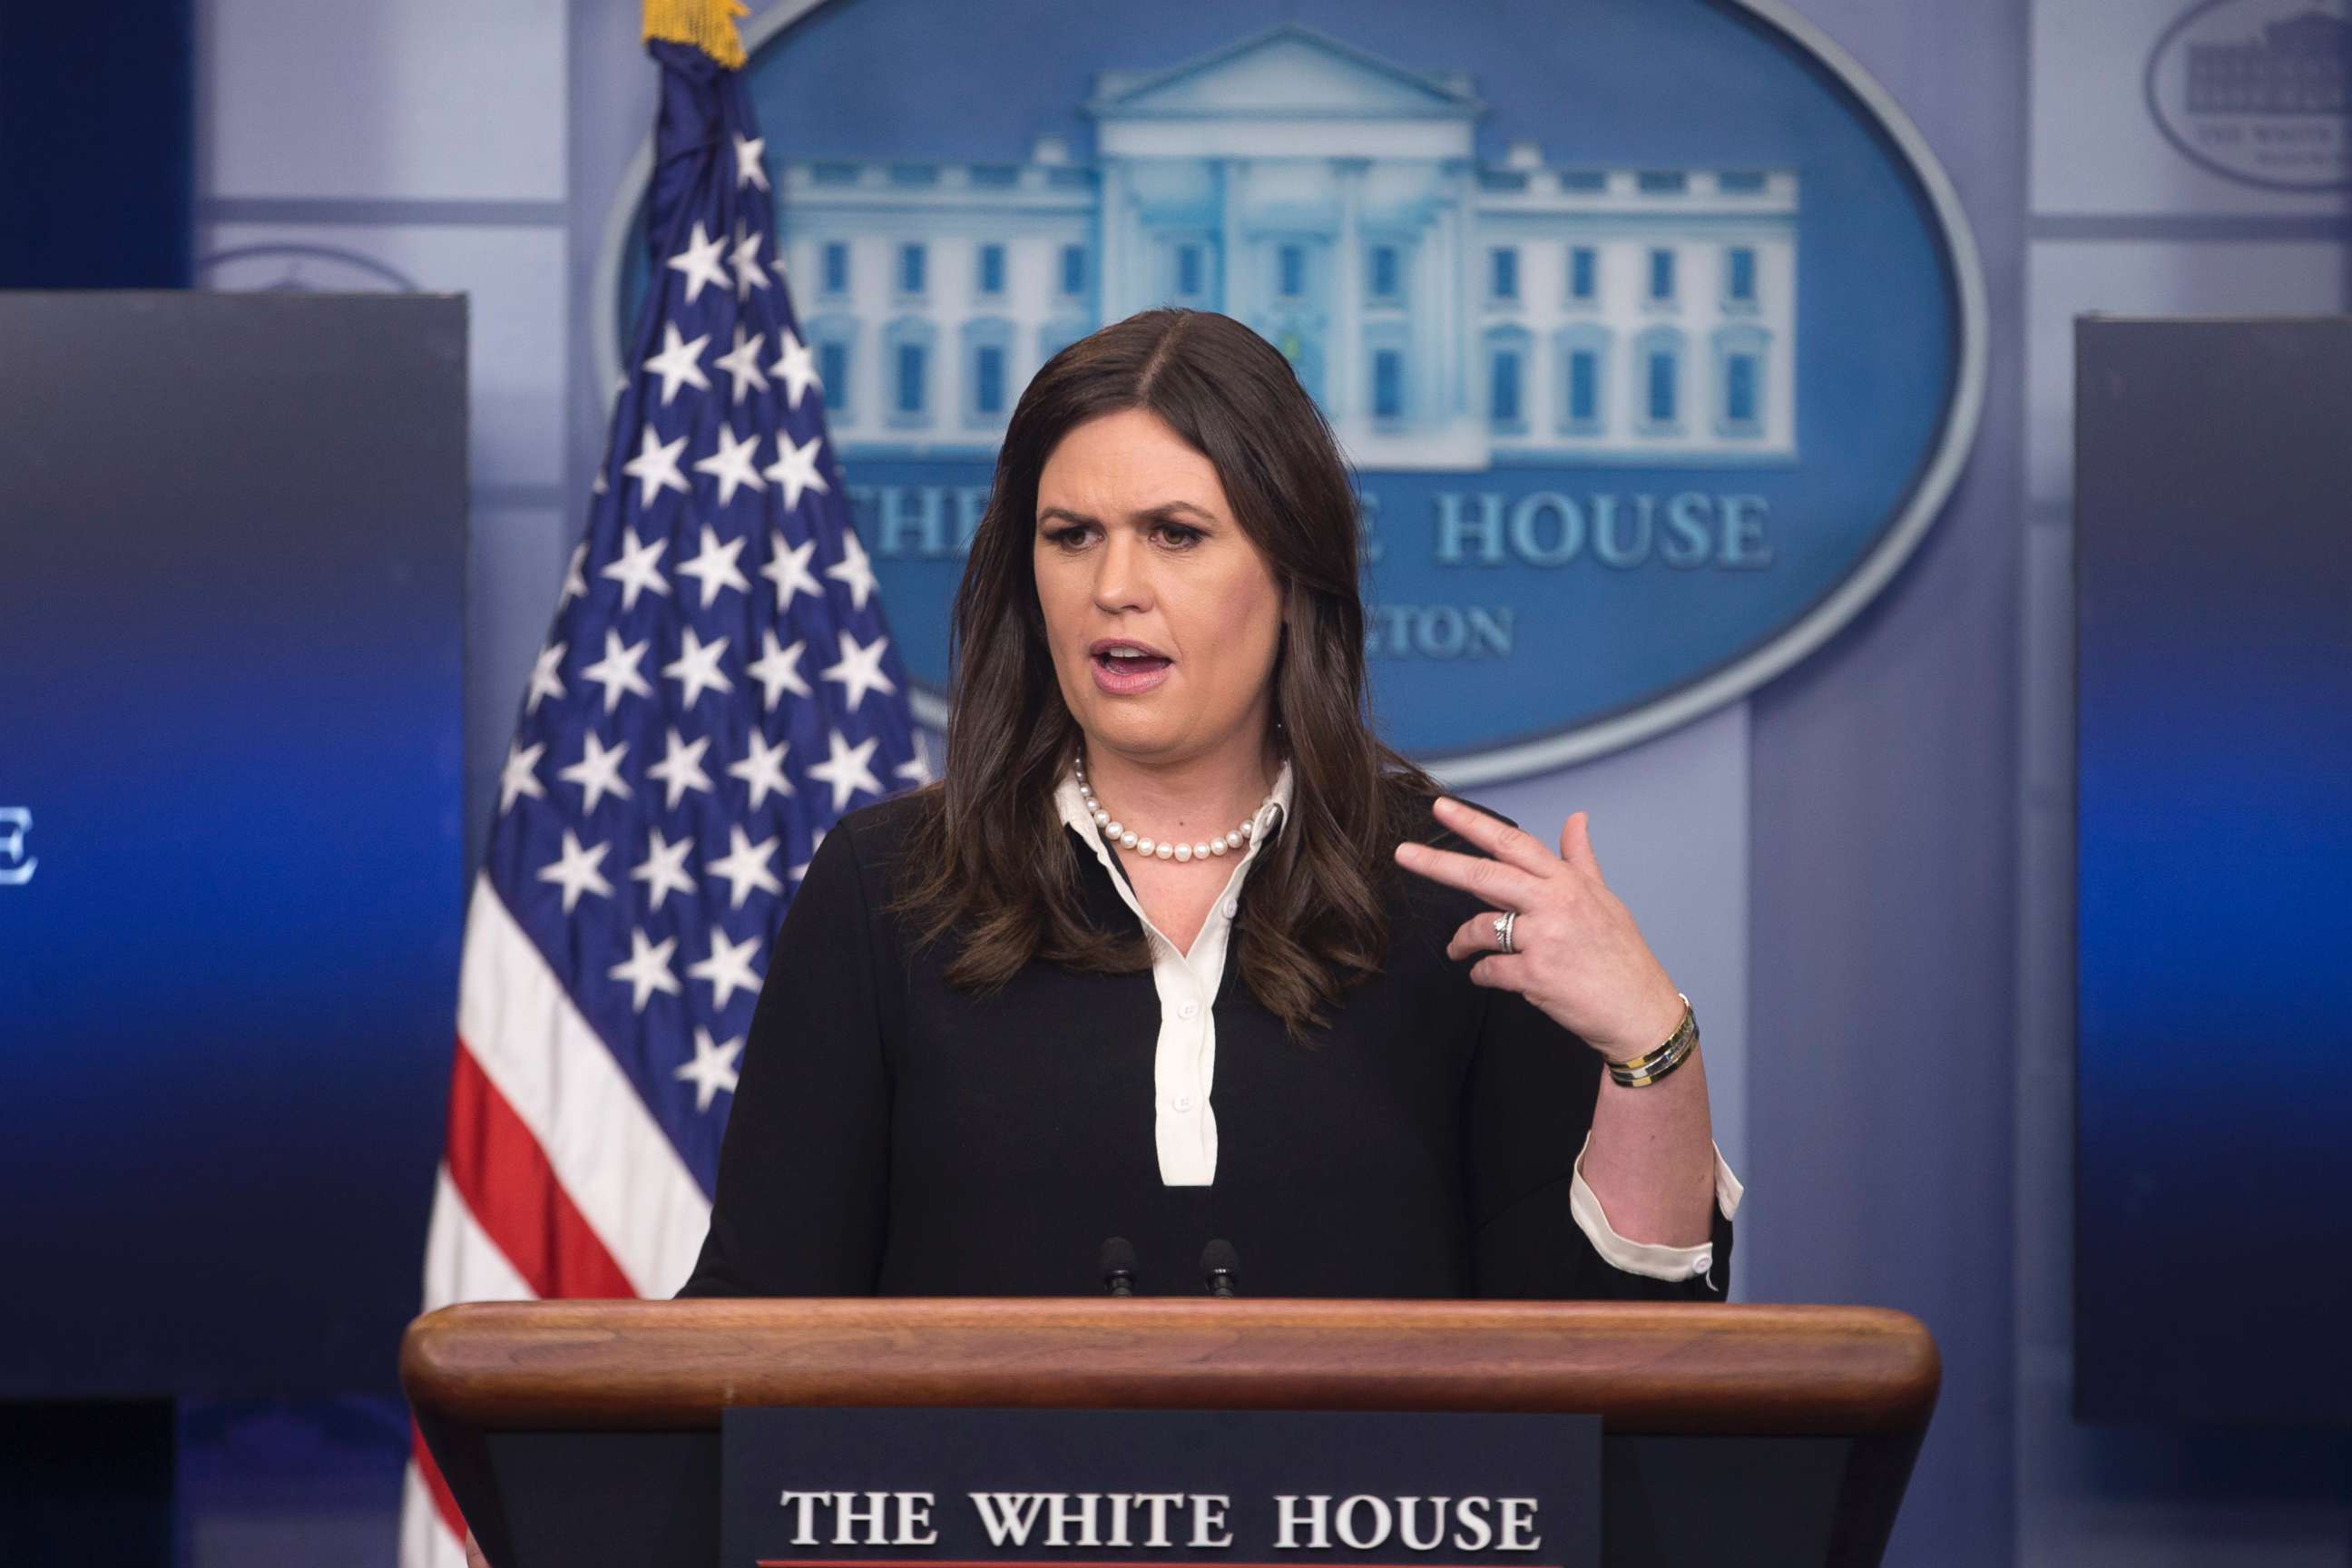 PHOTO: White House Deputy Press Secretary Sarah Huckabee Sanders speaks during a news conference in which she defended President Trump after he wrote a widely-criticized tweet mocking Mika Brzezinski, in Washington, June 29, 2017.